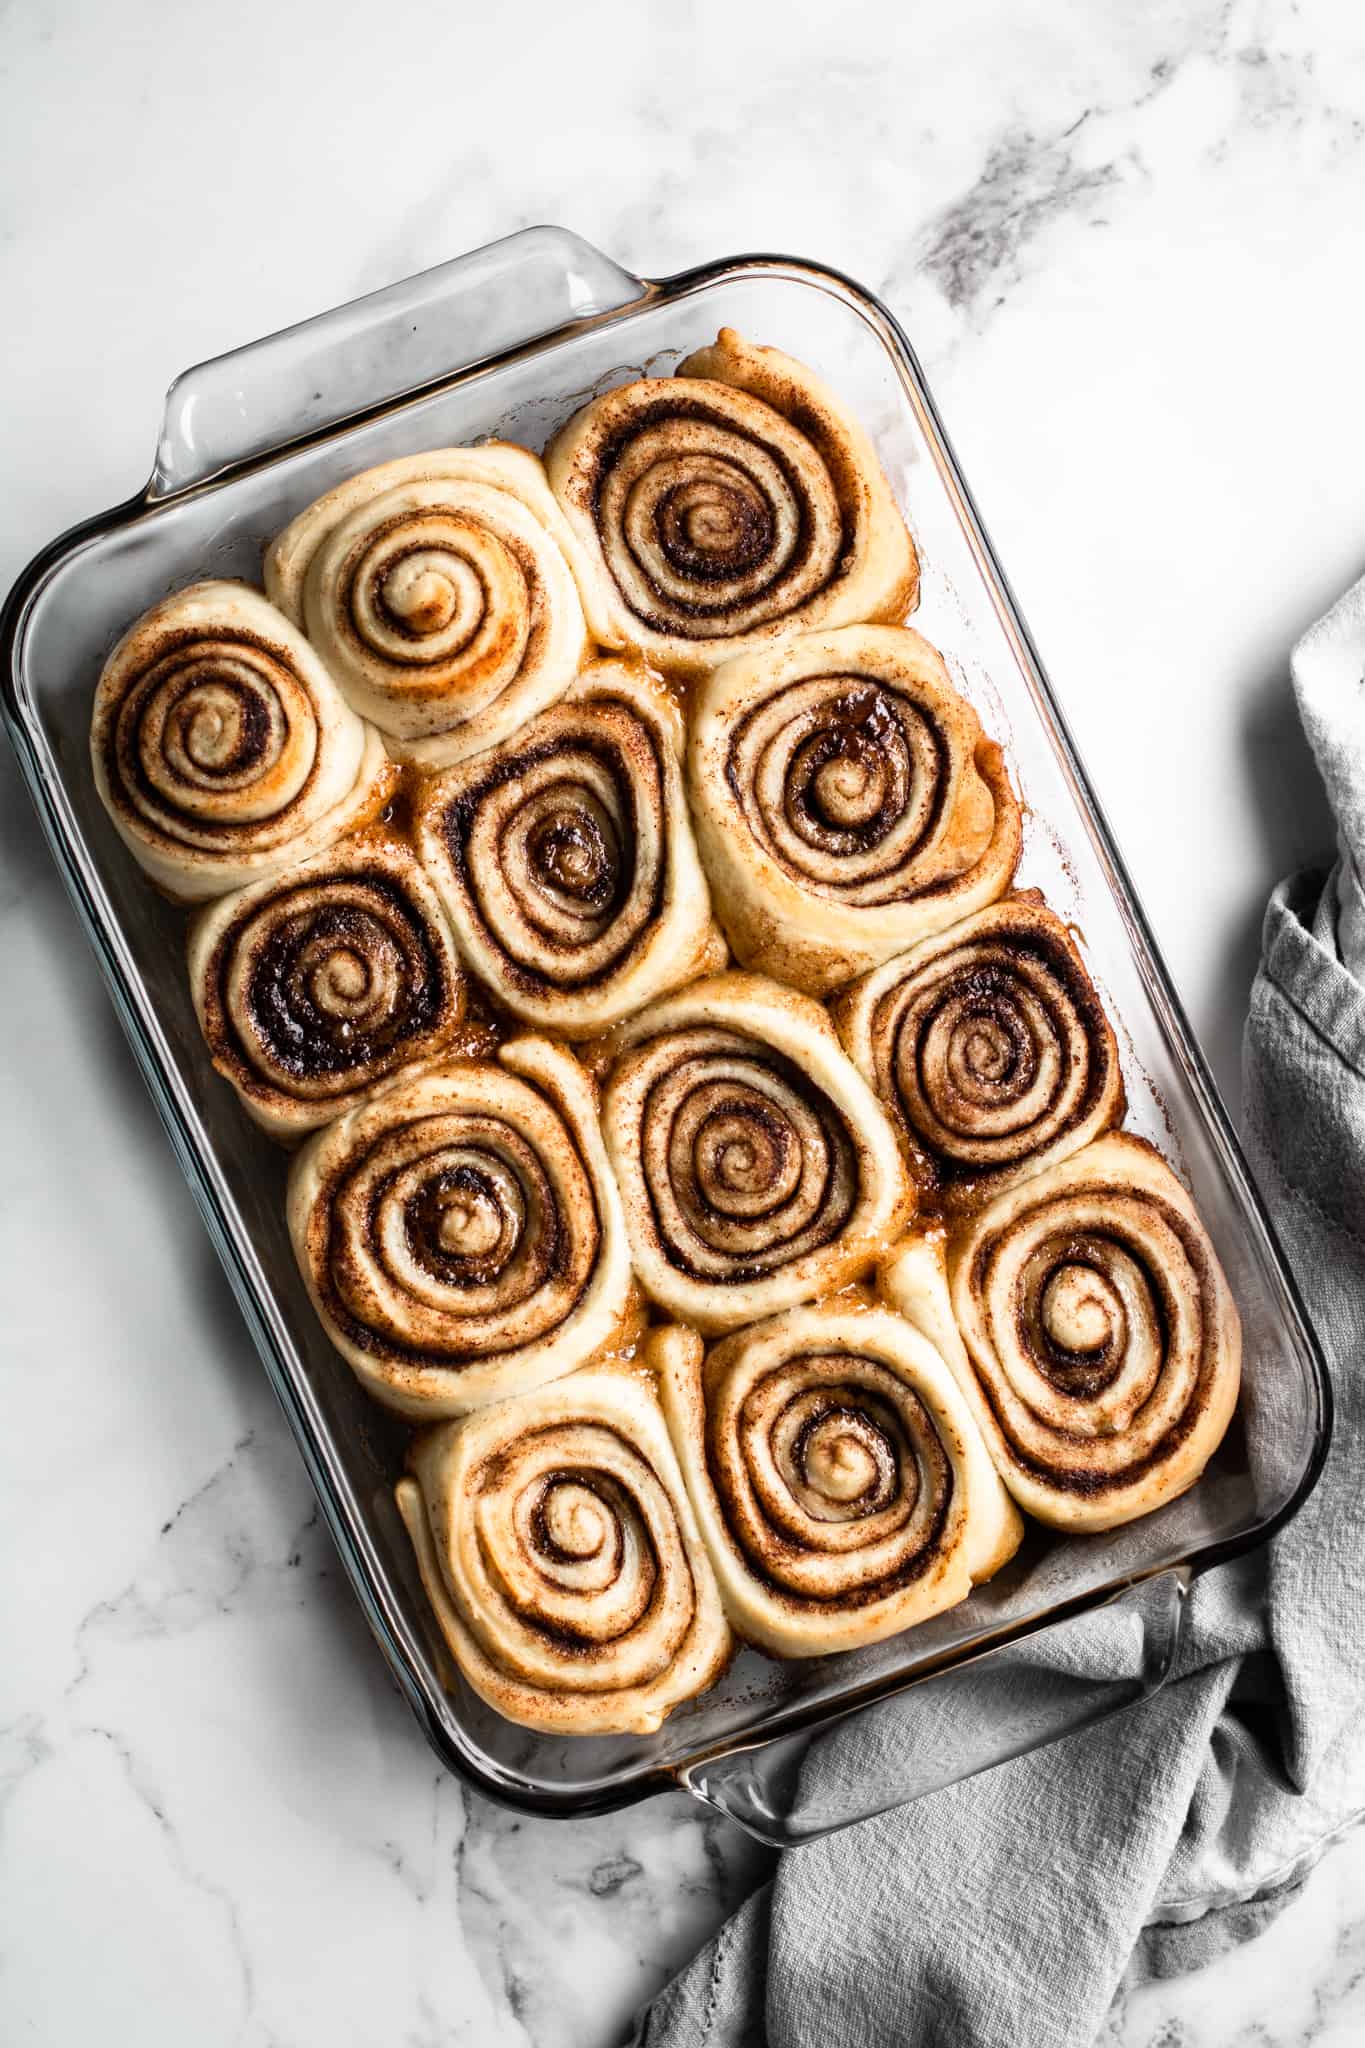 Baked cinnamon rolls in a glass dish